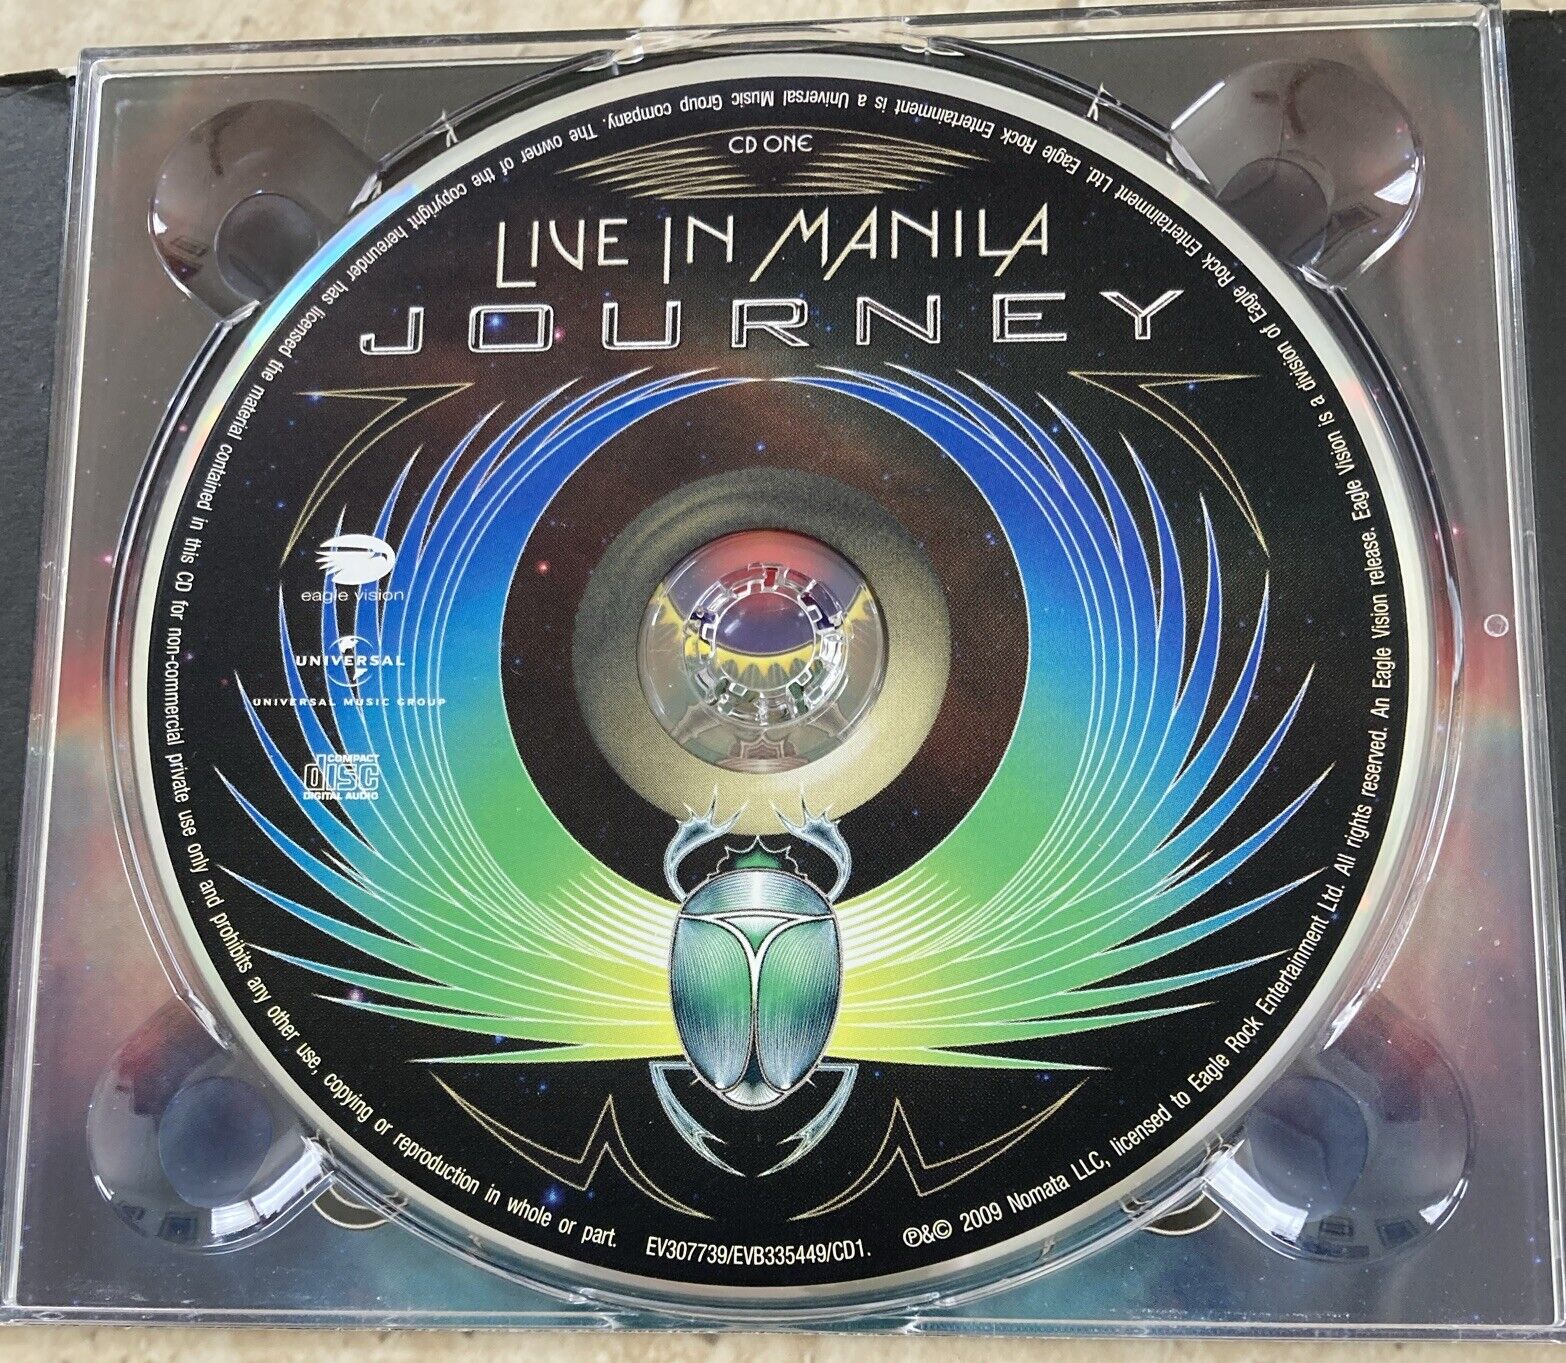 JOURNEY “LIVE IN MANILA” DVD CD COMBO PRE-OWNED SET MUSIC VIDEO